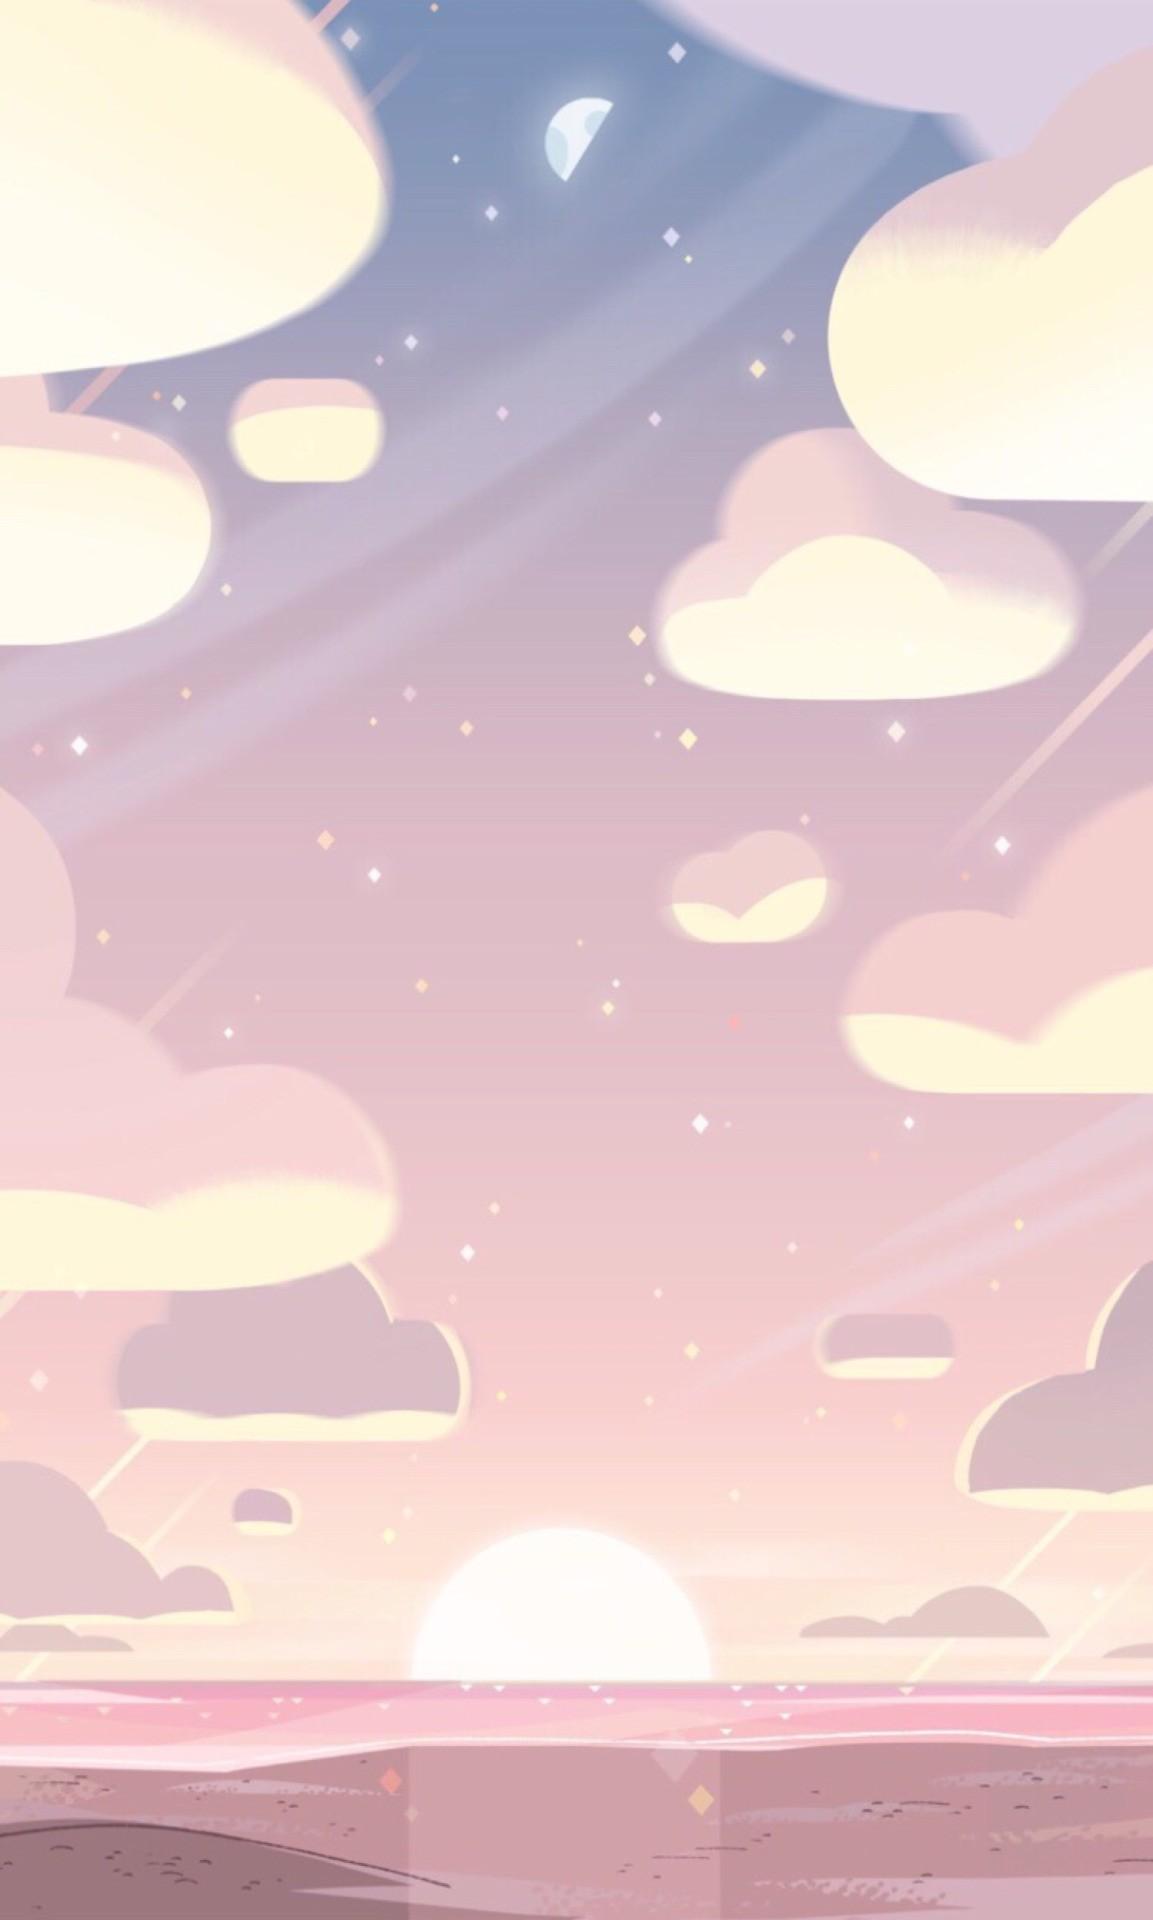 Steven Universe background SpaceDownload free